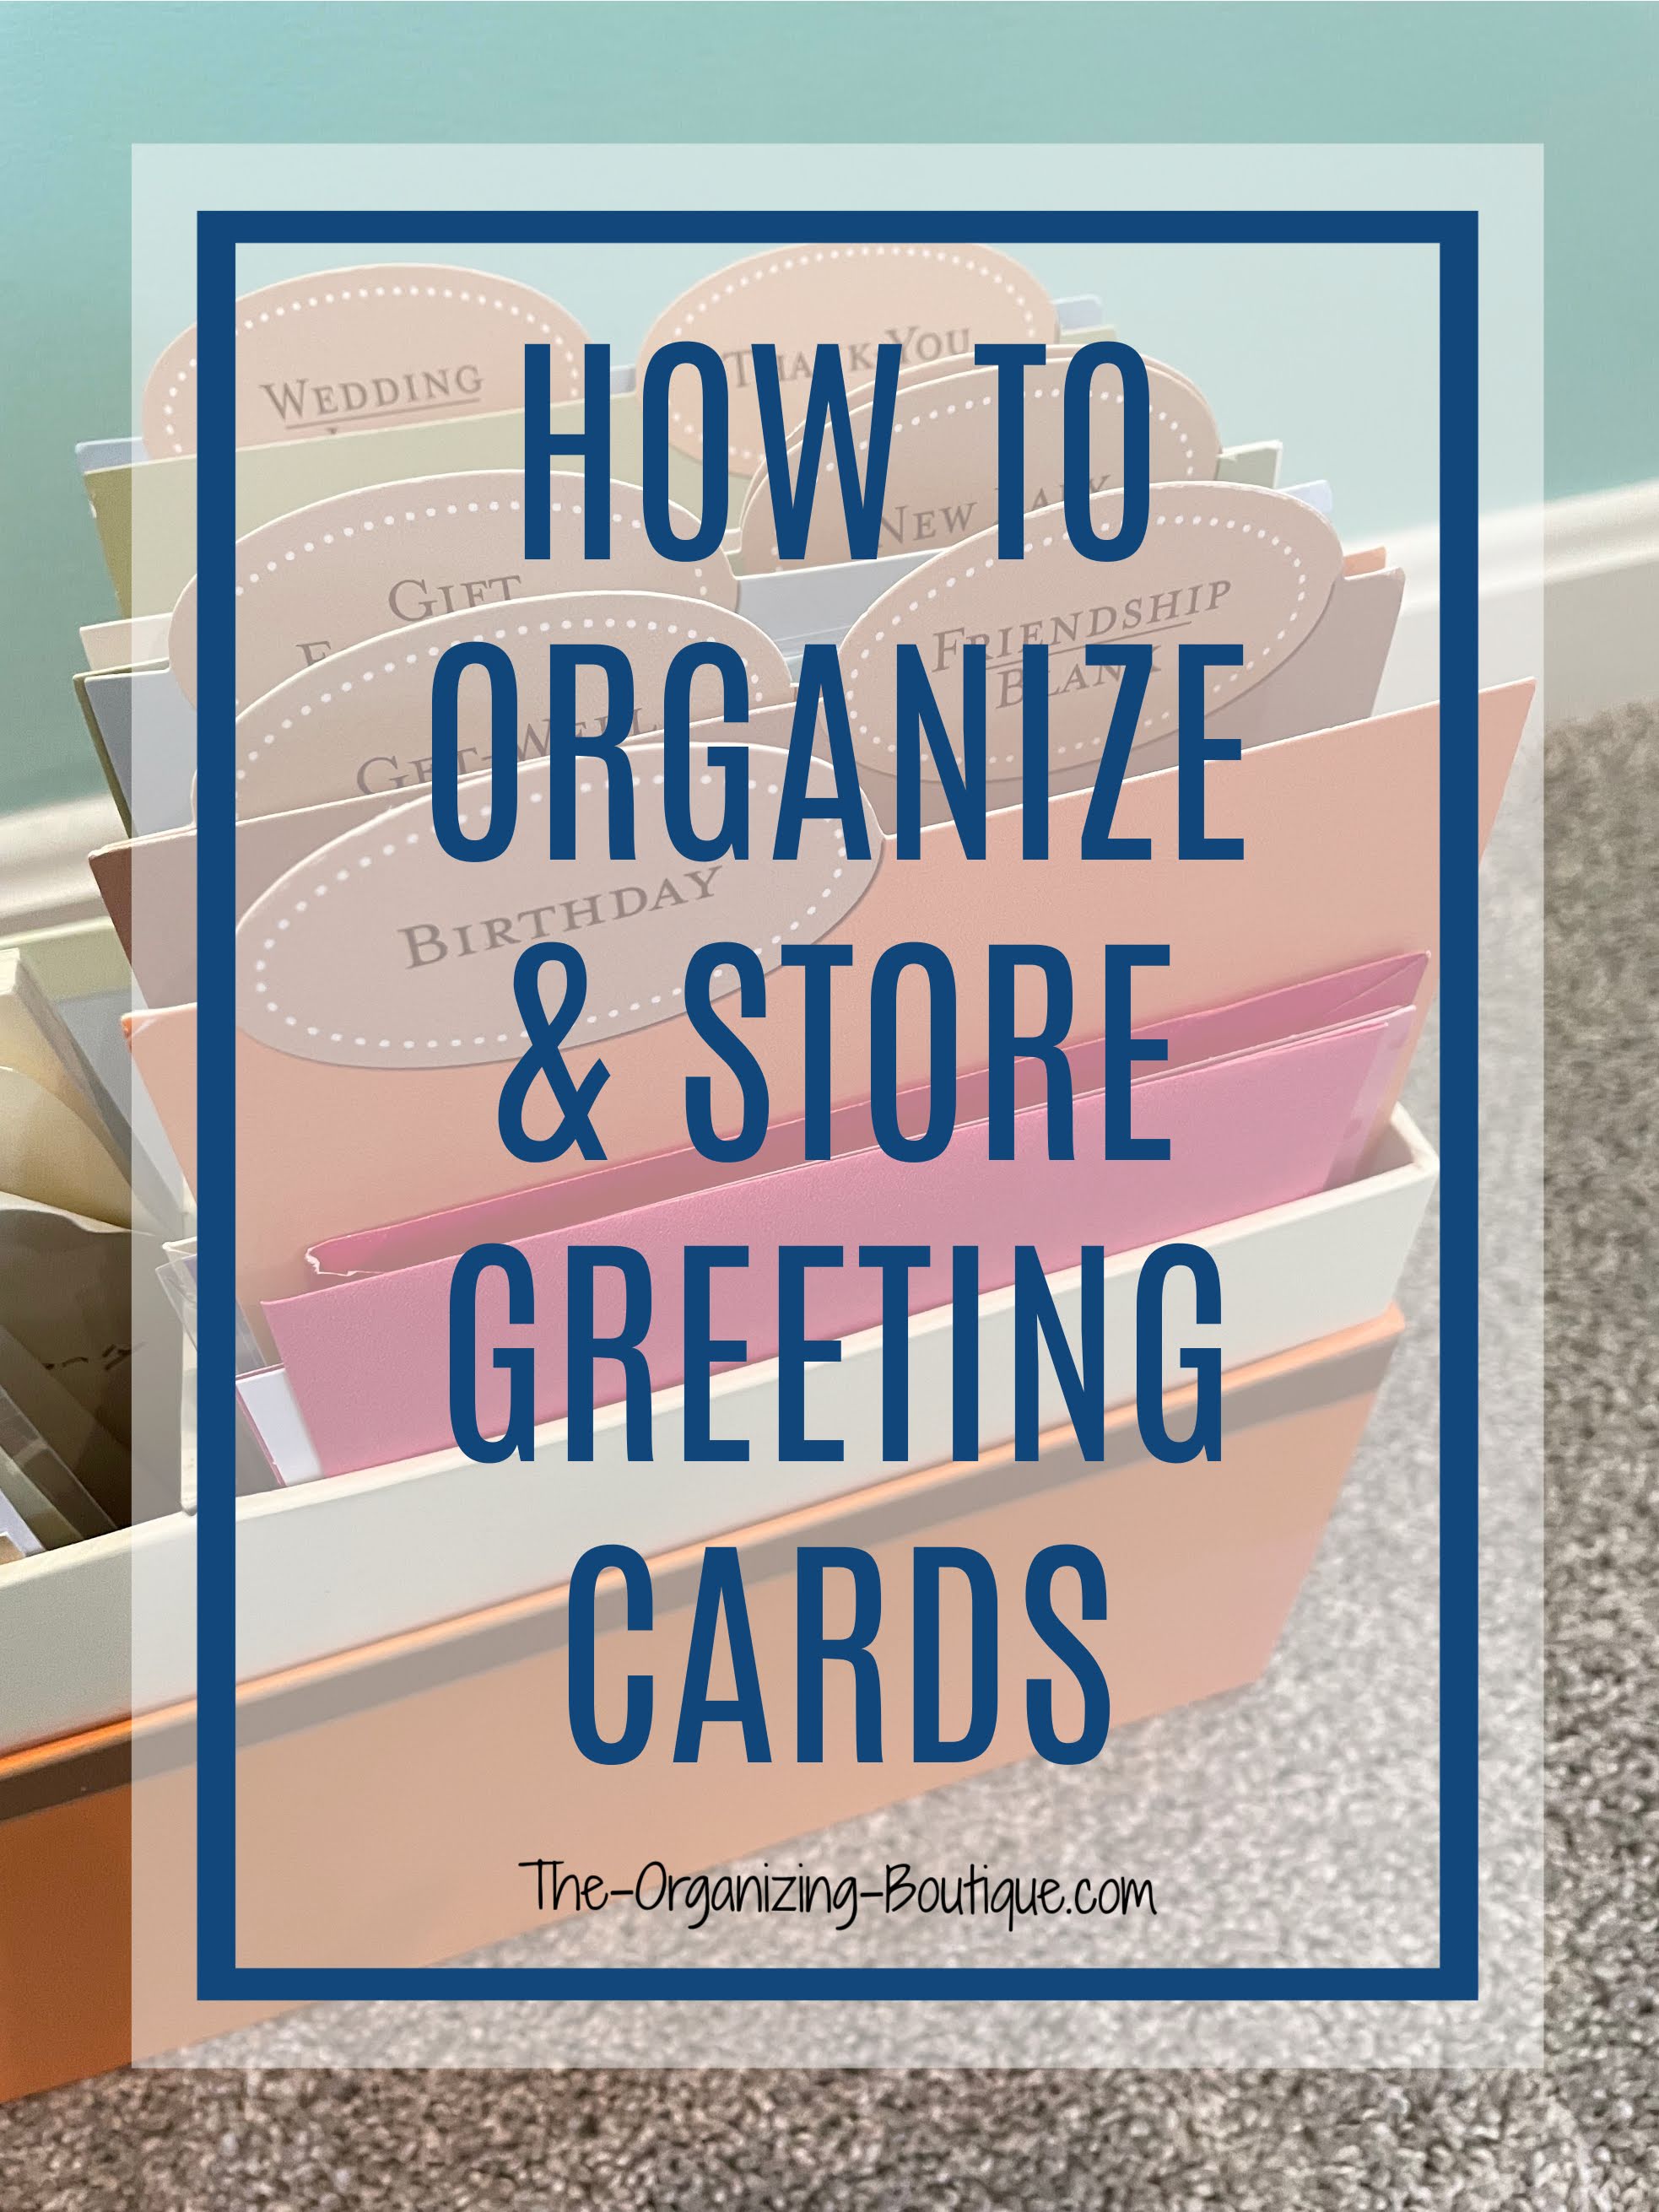 Organize Greeting Cards Title